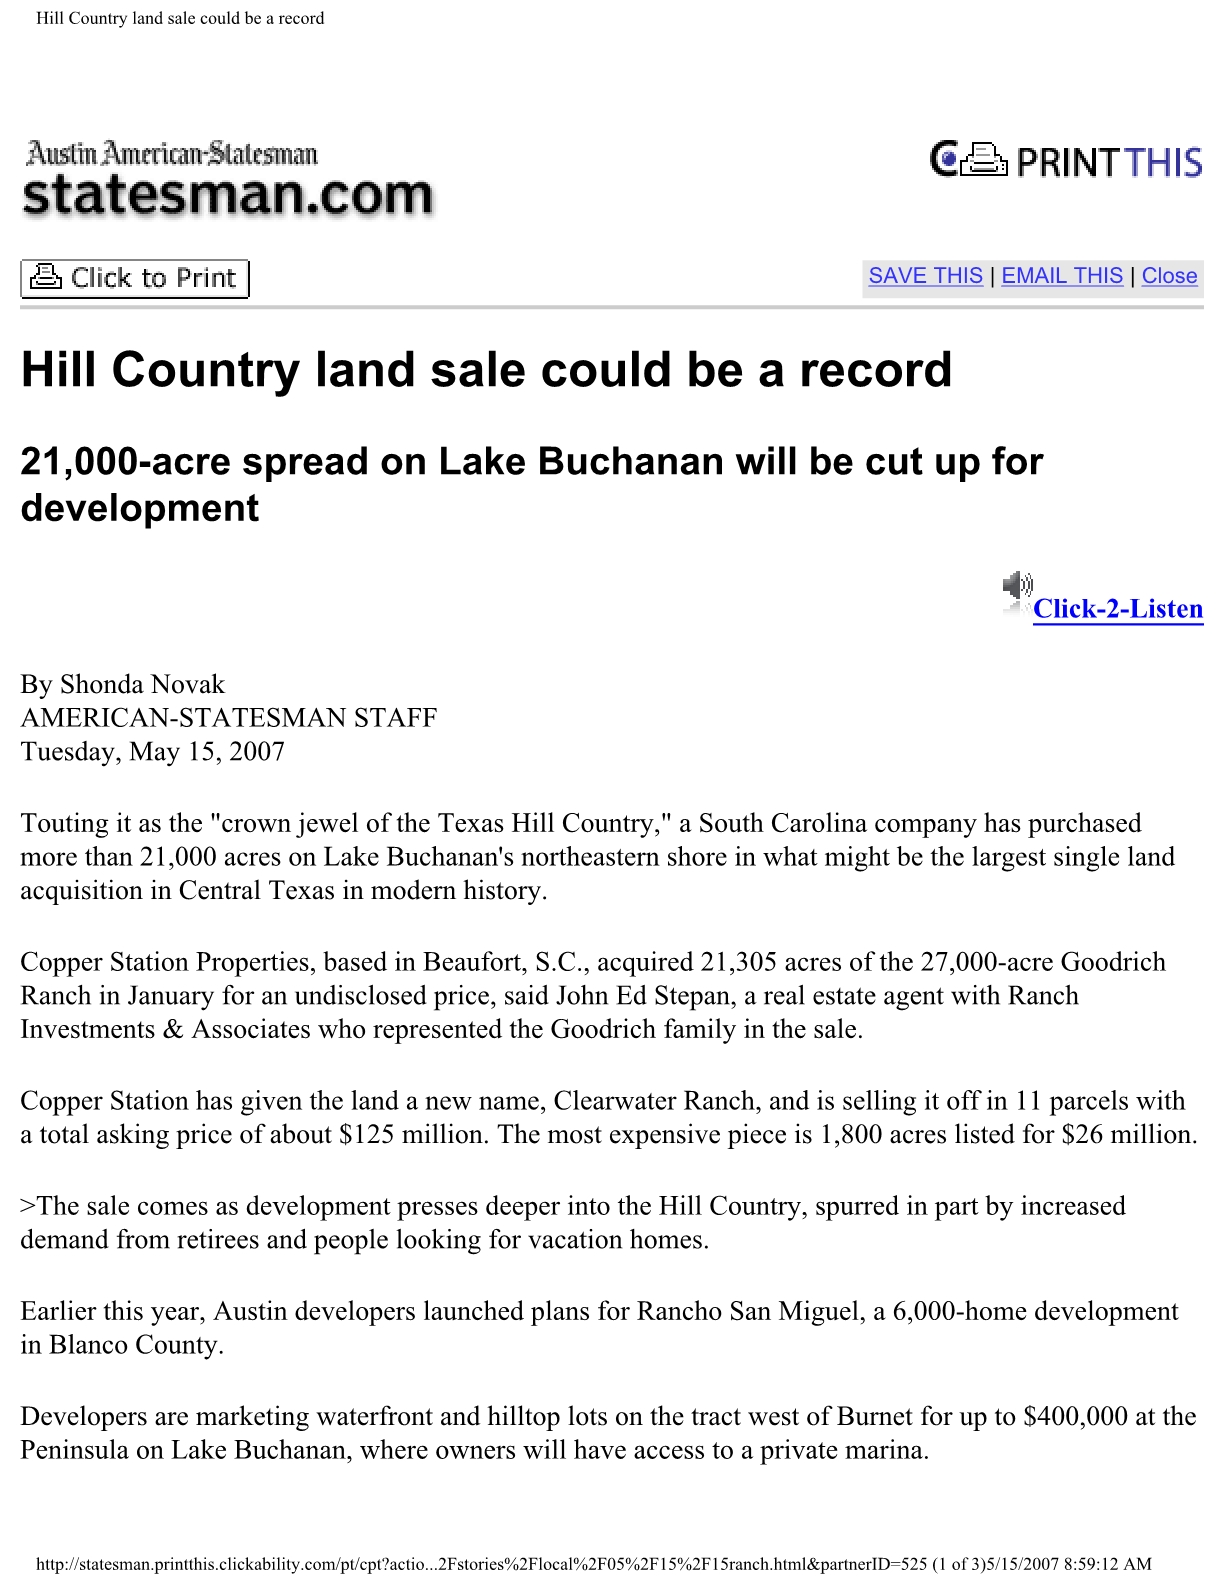 Hill Country Land Sale Could be a Record